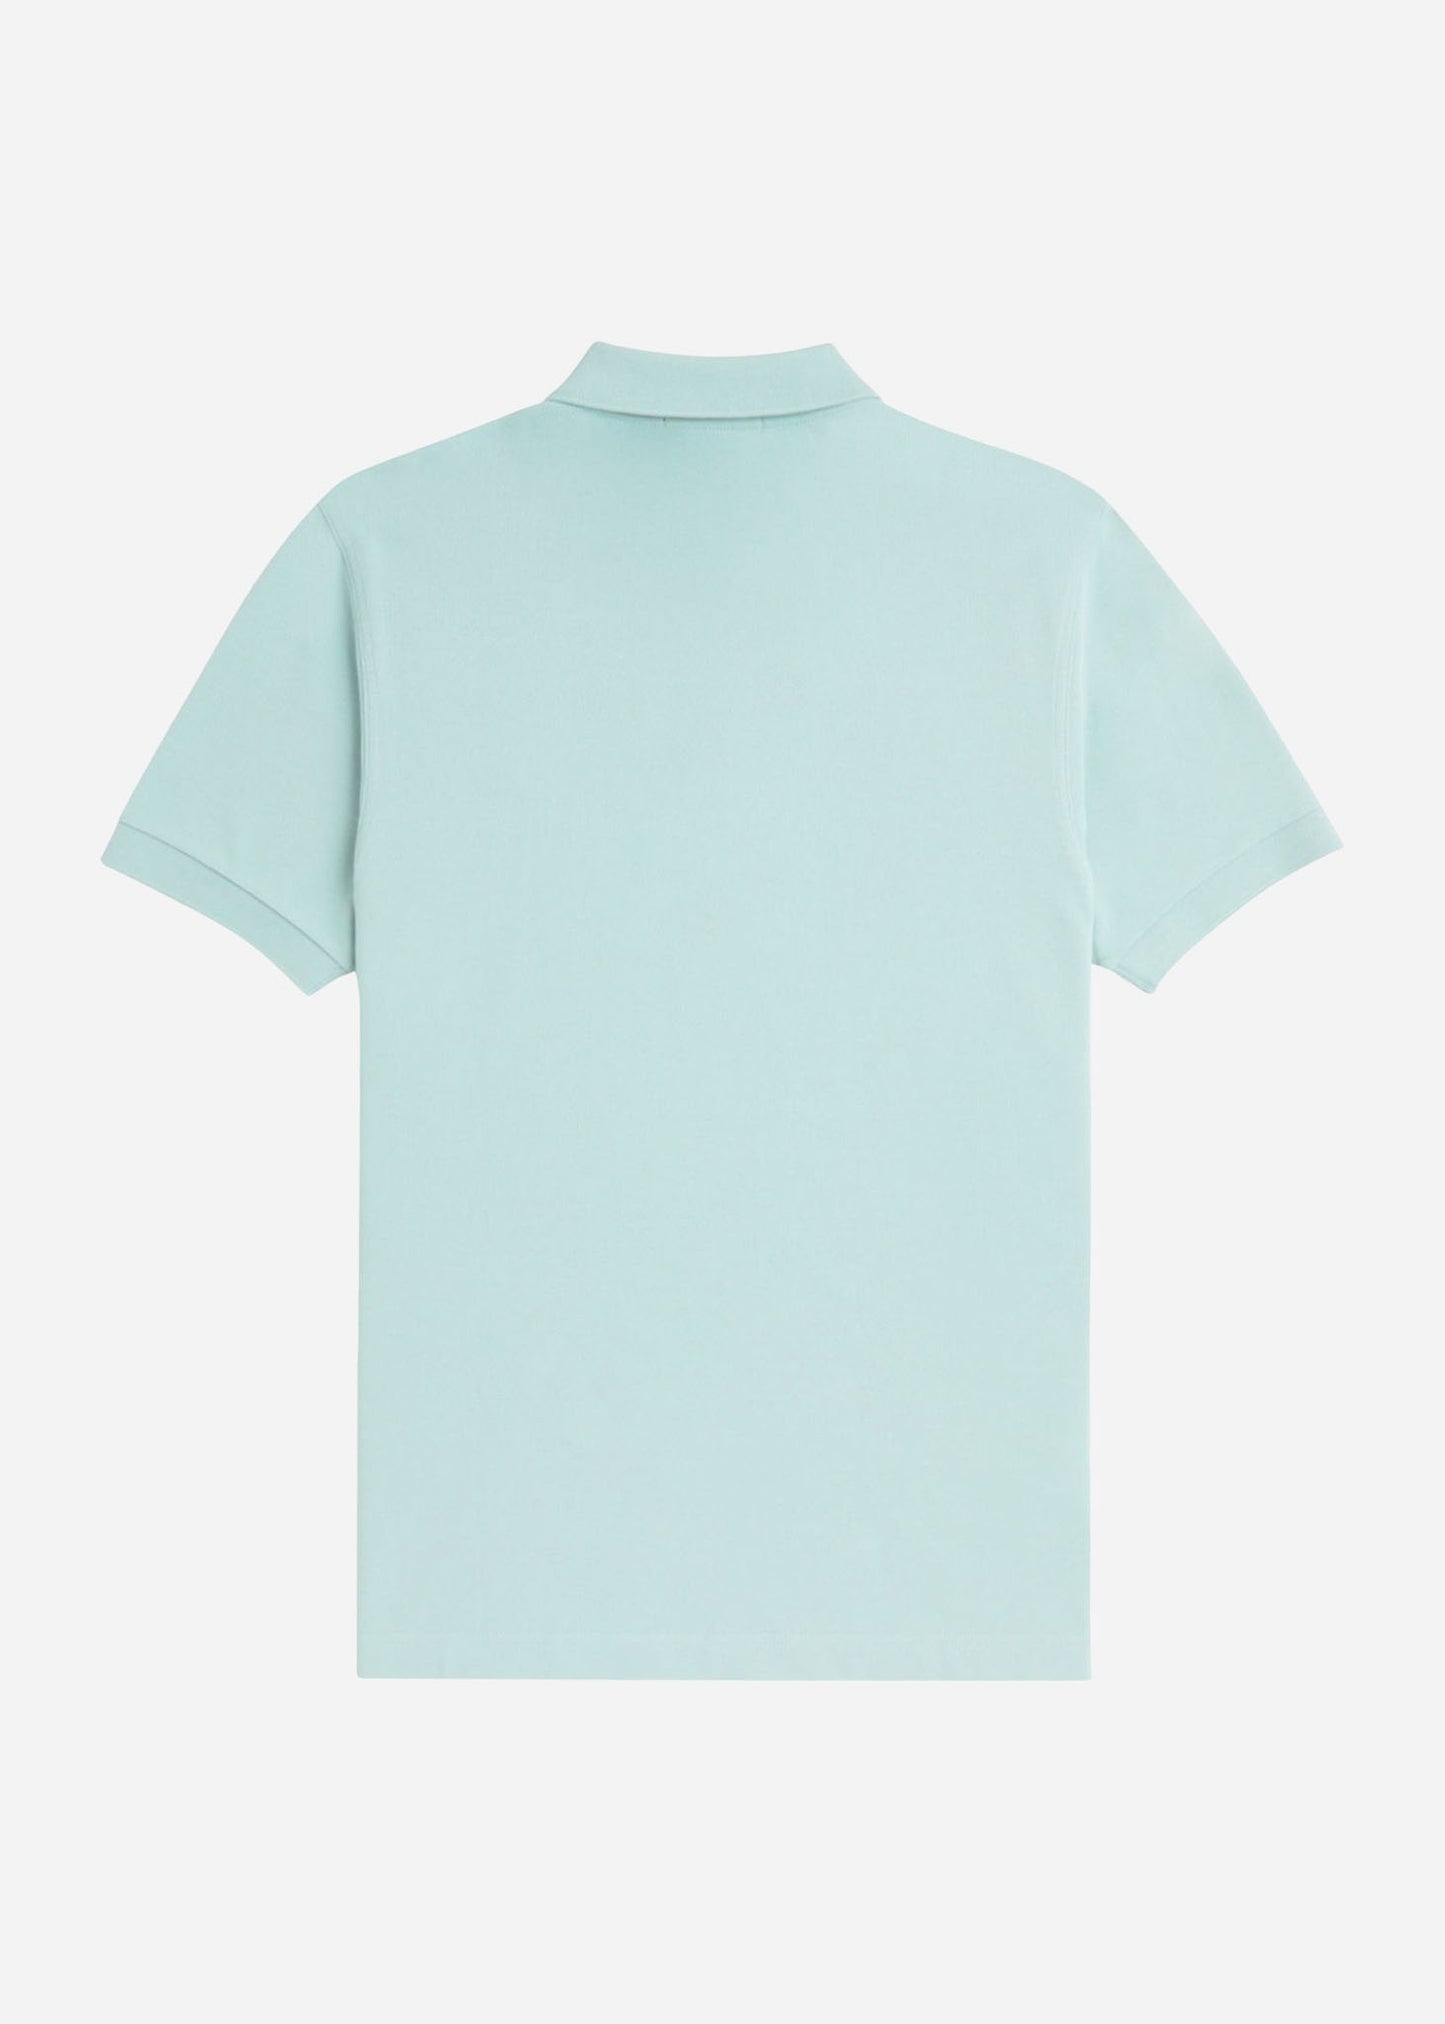 Fred Perry Polo's  Plain fred perry shirt - slvrblue dkcaram 